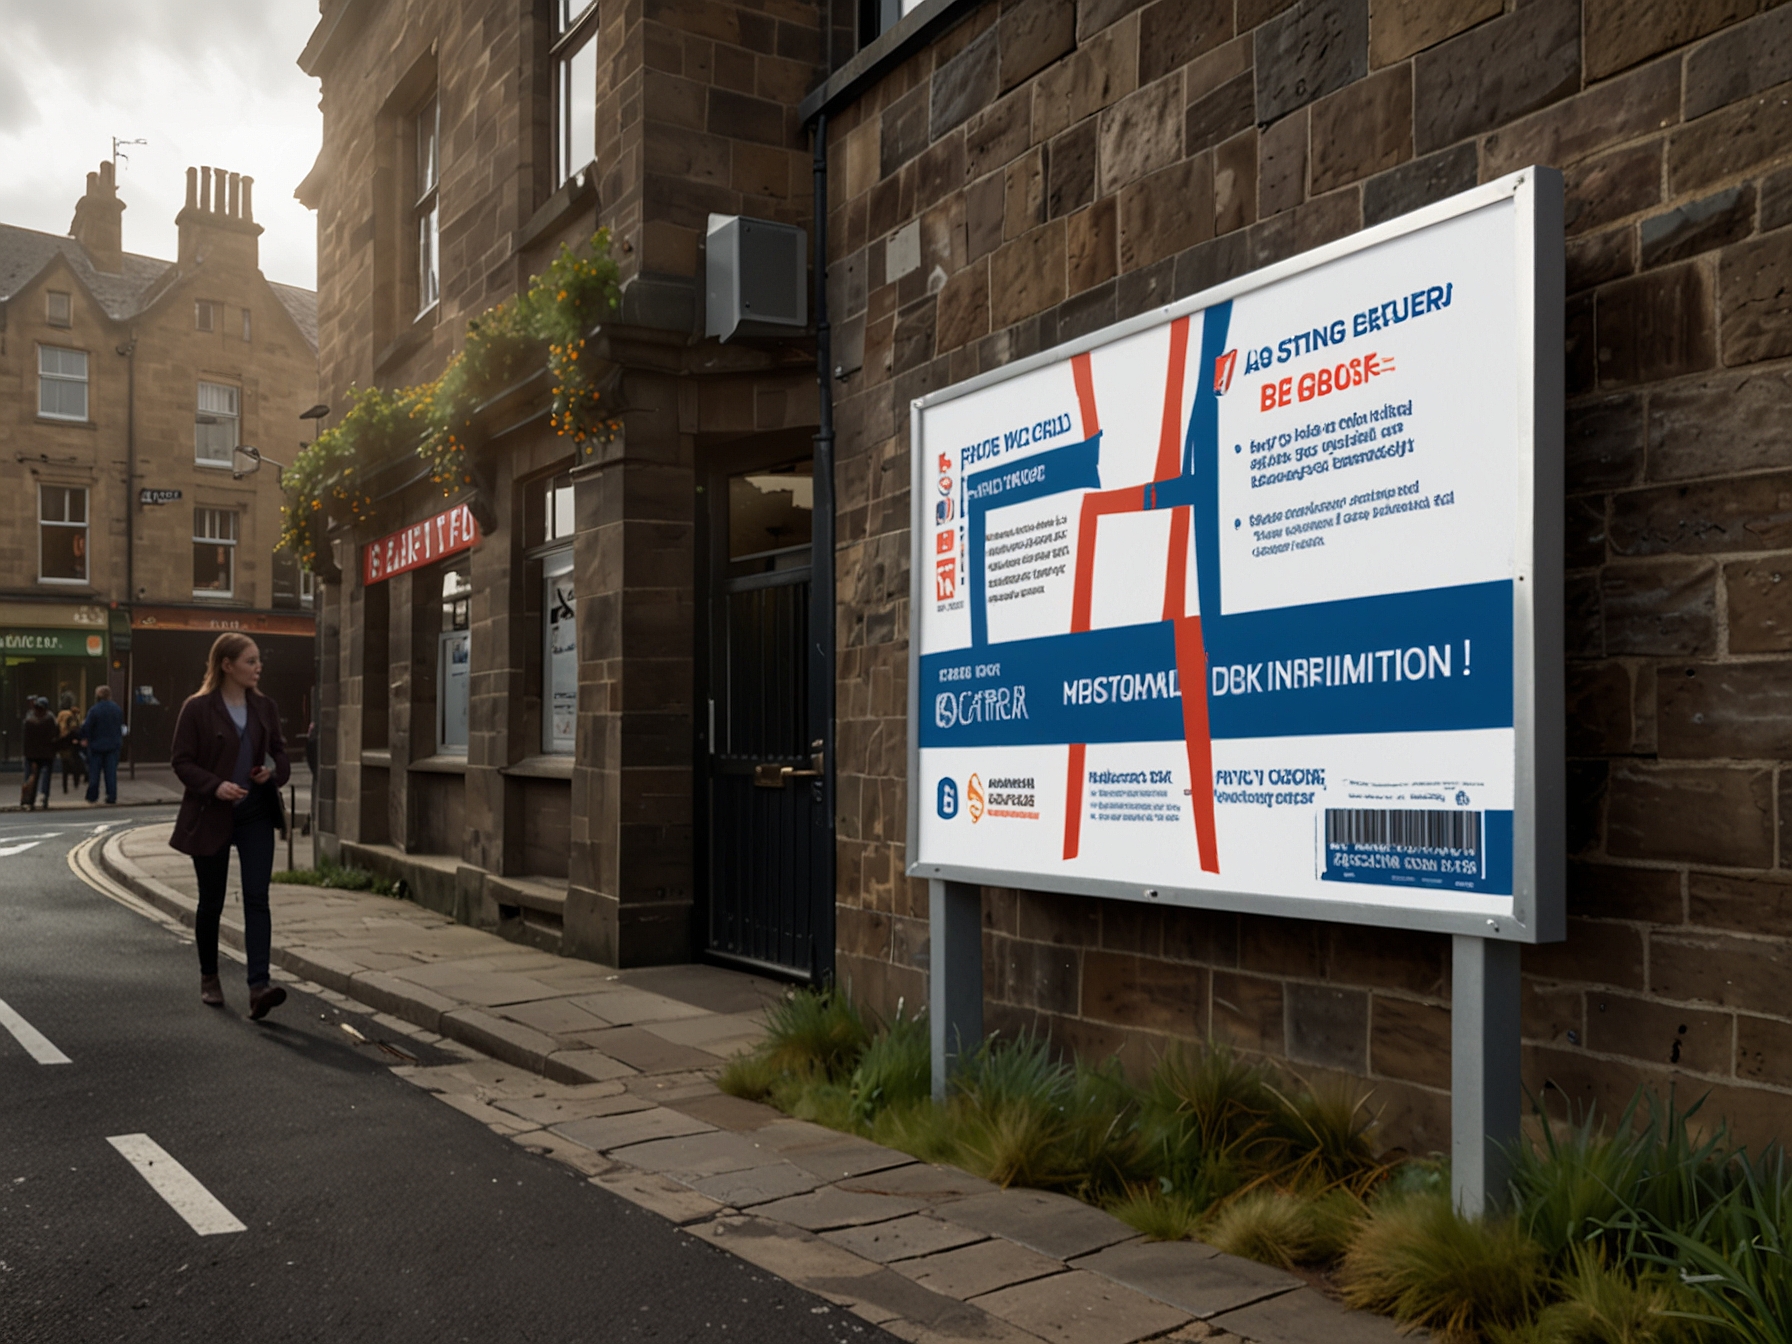 A public informational campaign billboard in Scotland explaining how voters can reissue delayed postal ballots, demonstrating local councils' commitment to maintaining election integrity.